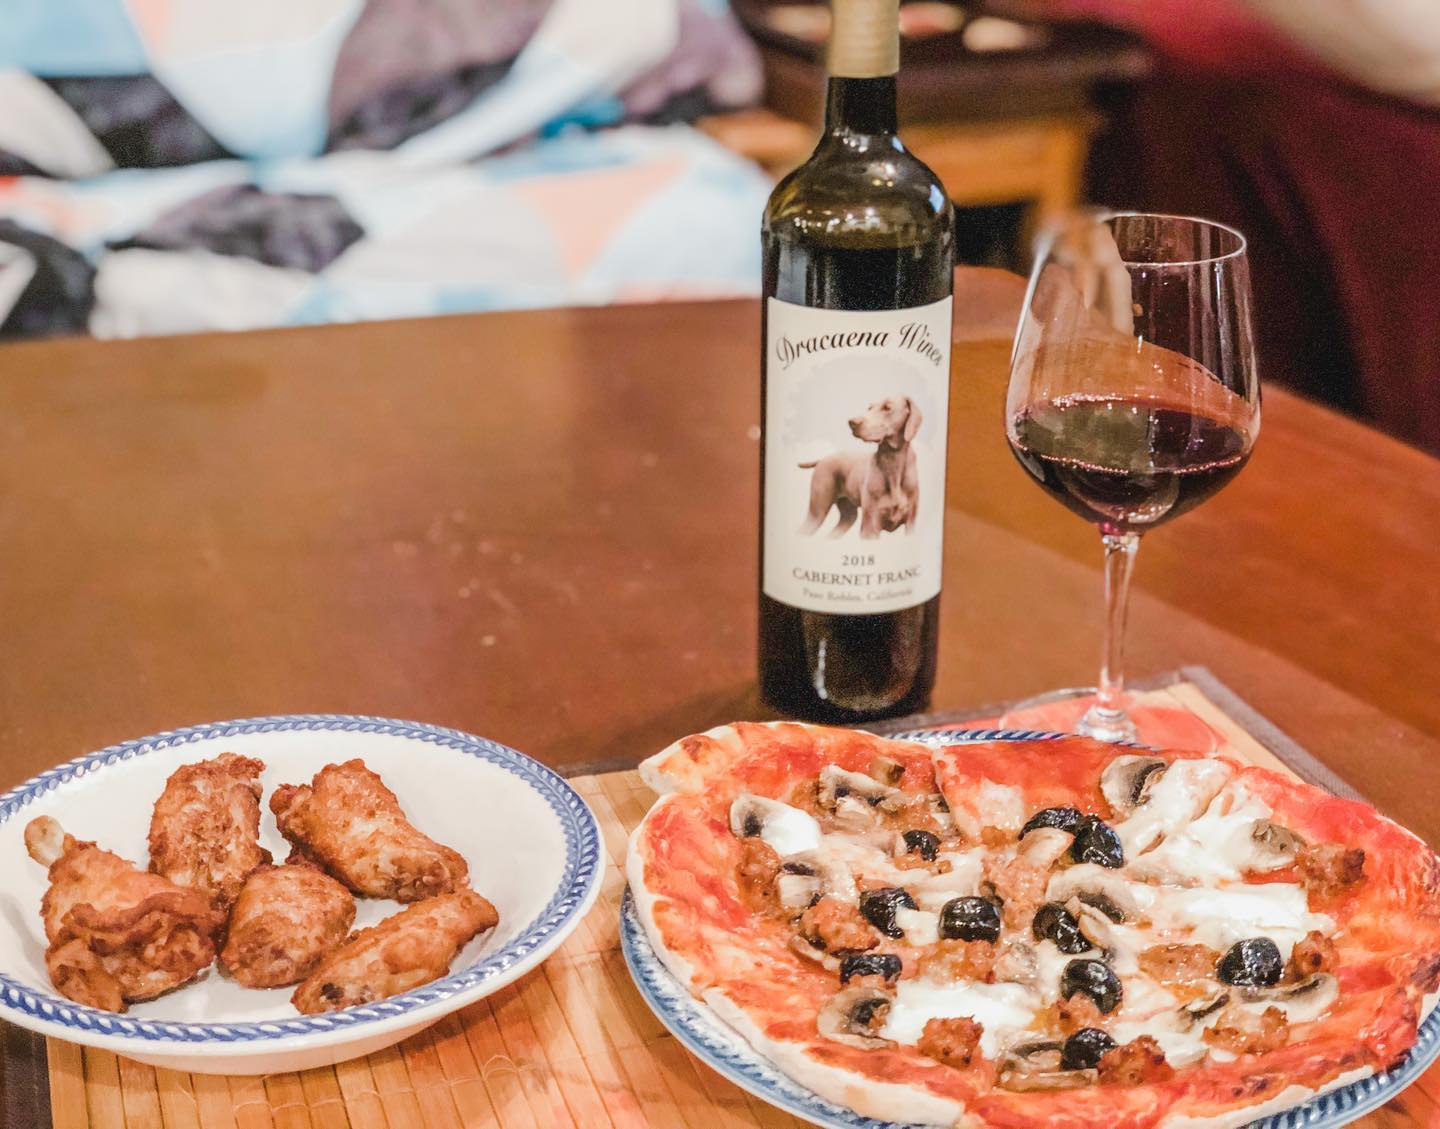 Super Bowl Sunday! Homemade pizza (from scratch!) wings (frozen 🤣), & wine (my first Cab Franc!)😎😎#superbowl #dracenawines #superbowl2021 [instagram]